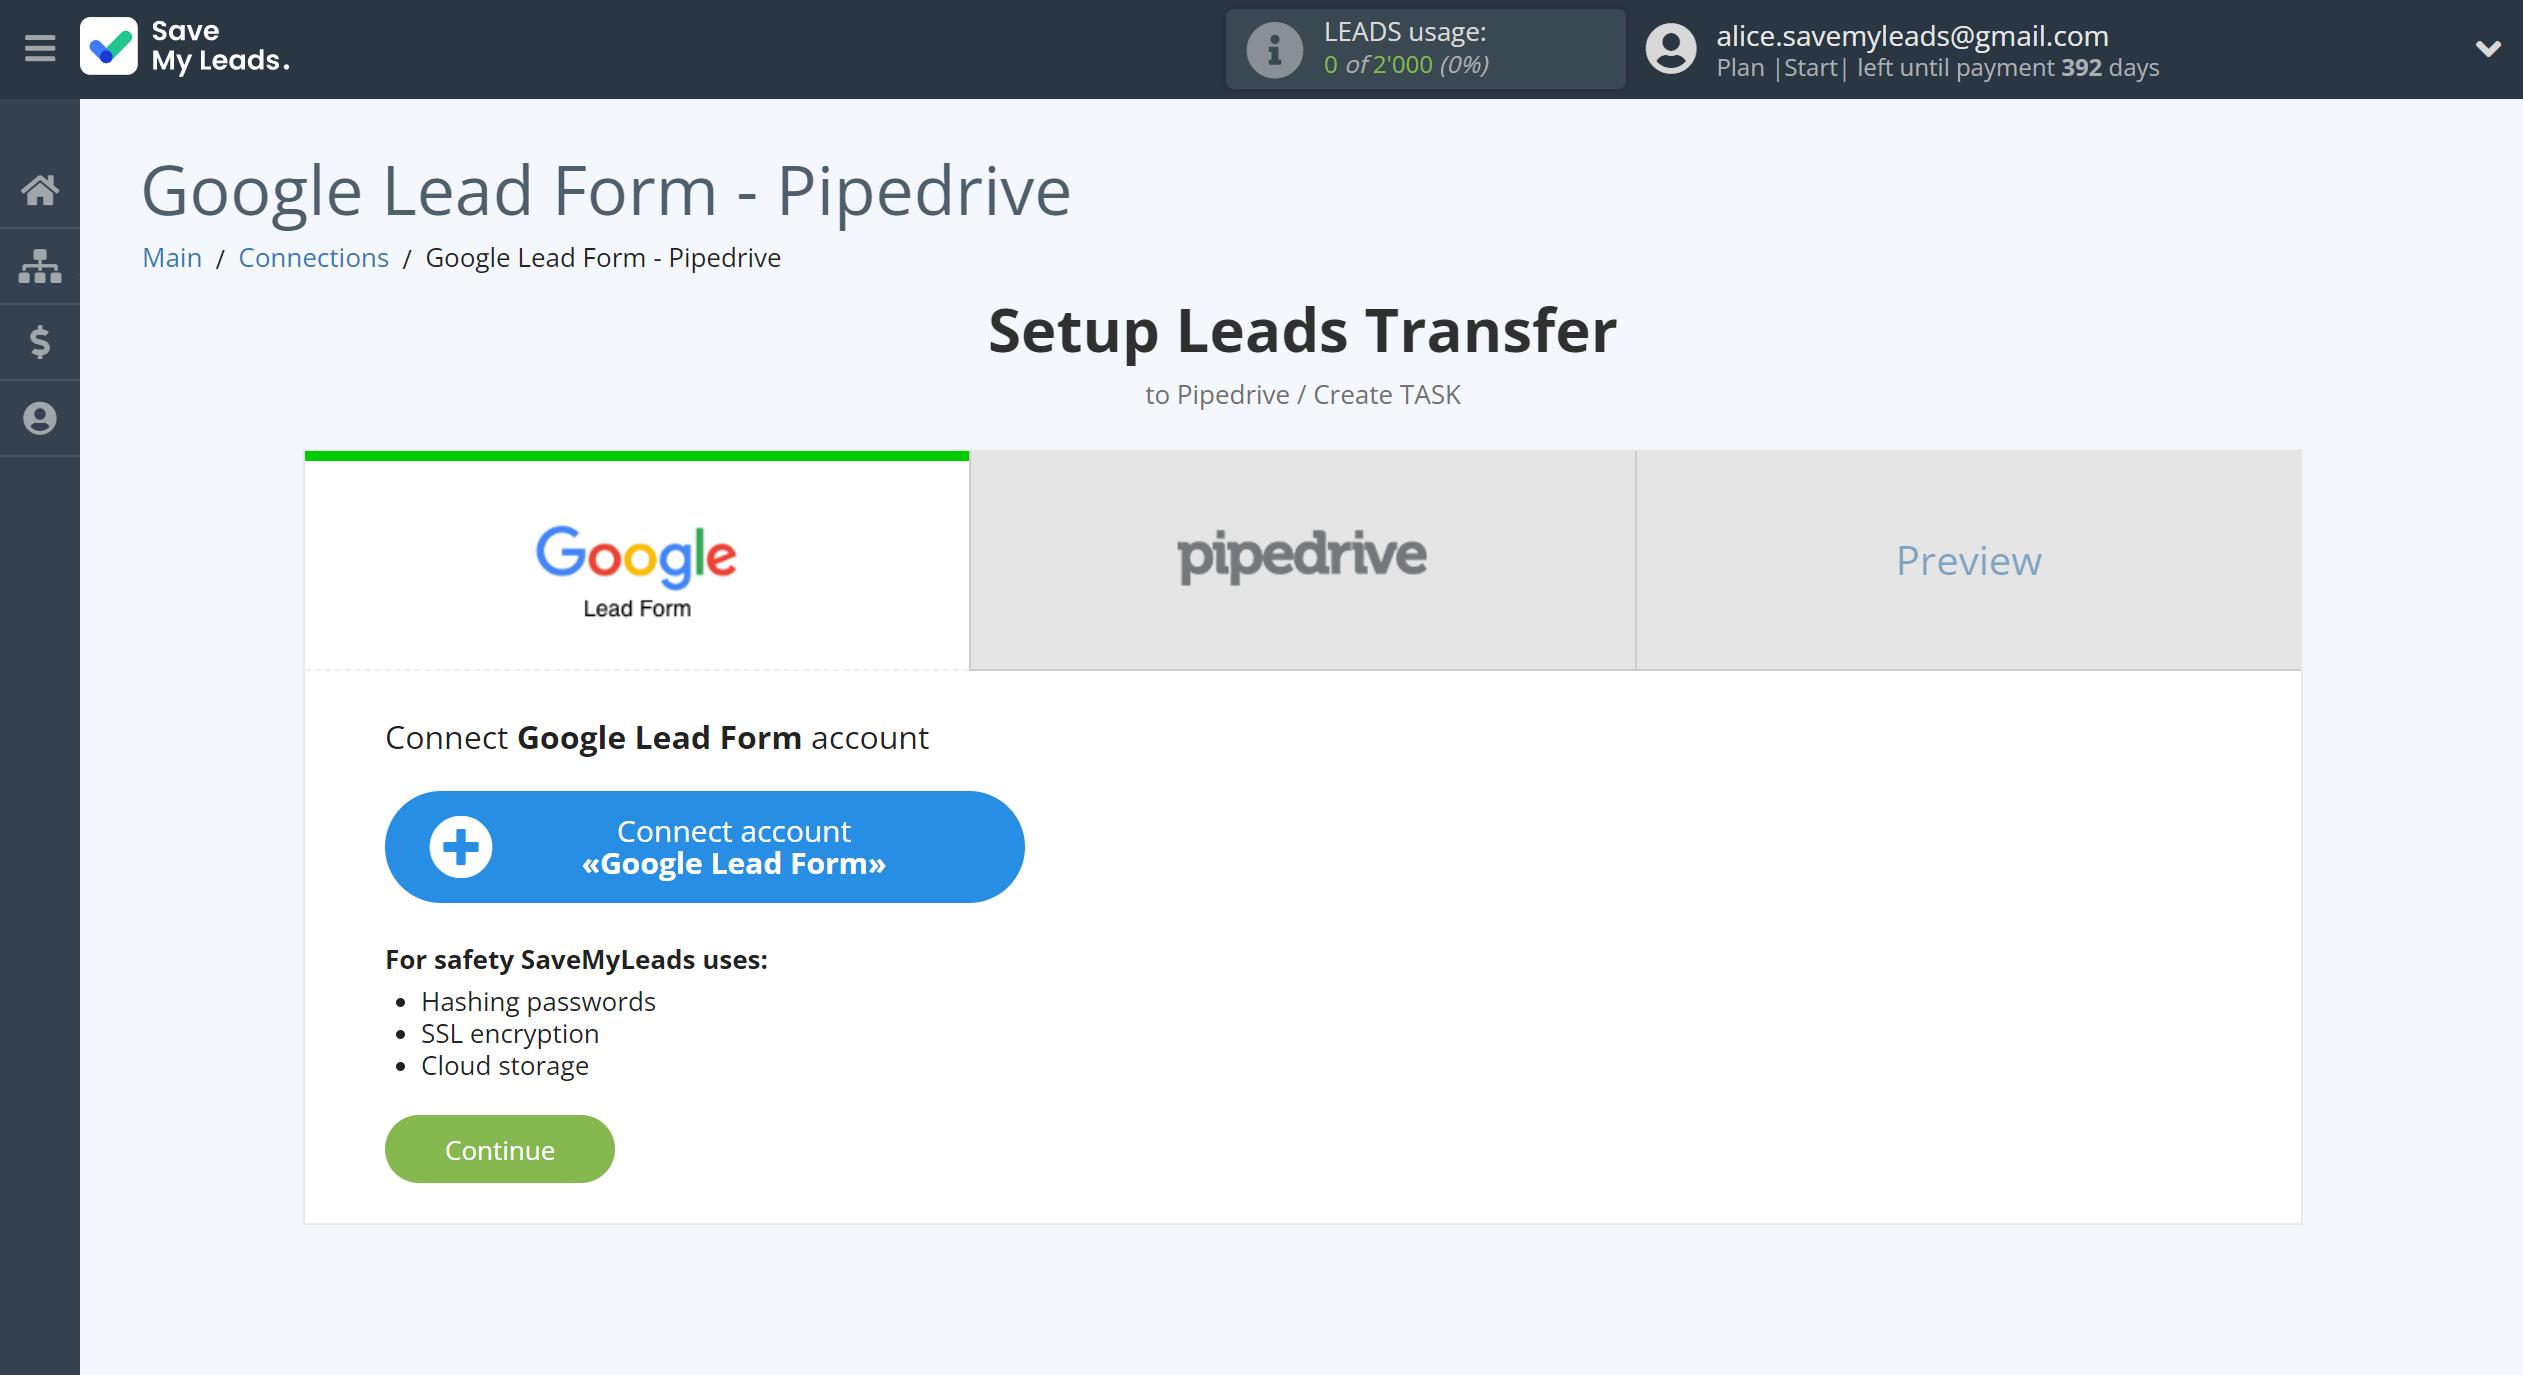 How to Connect Google Lead Form with Pipedrive Create Task | Data Source account connection